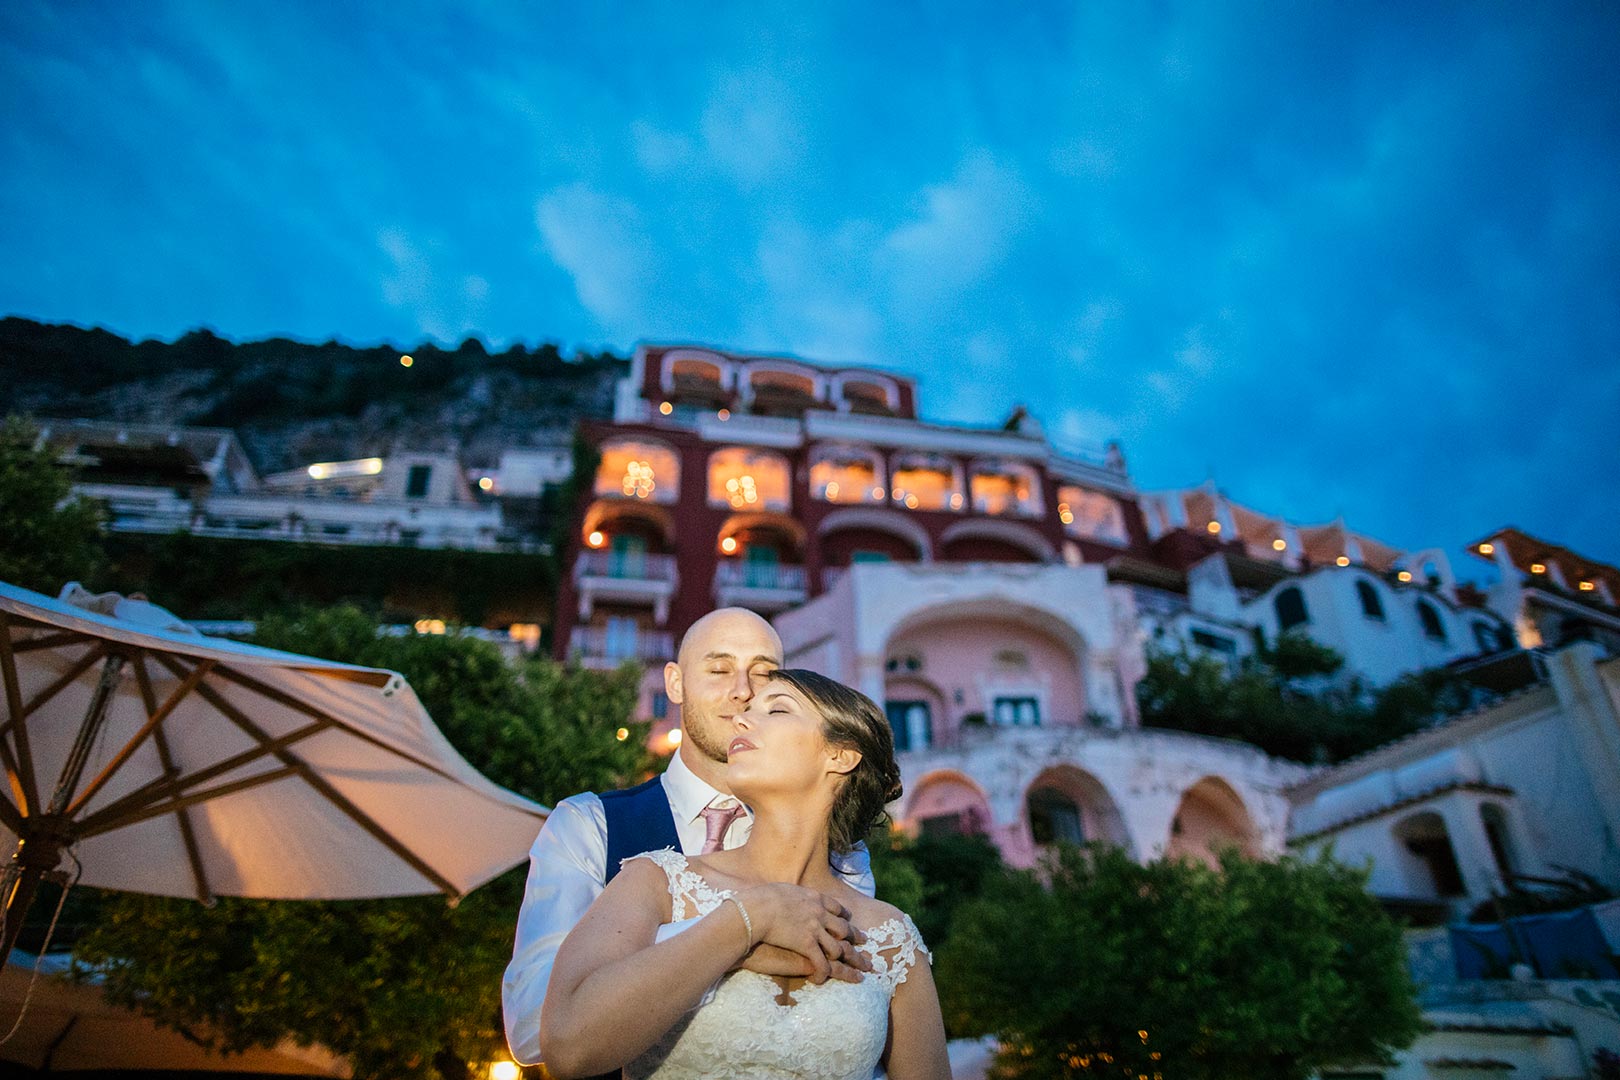 Getting-married-in-Positano-James-Emma